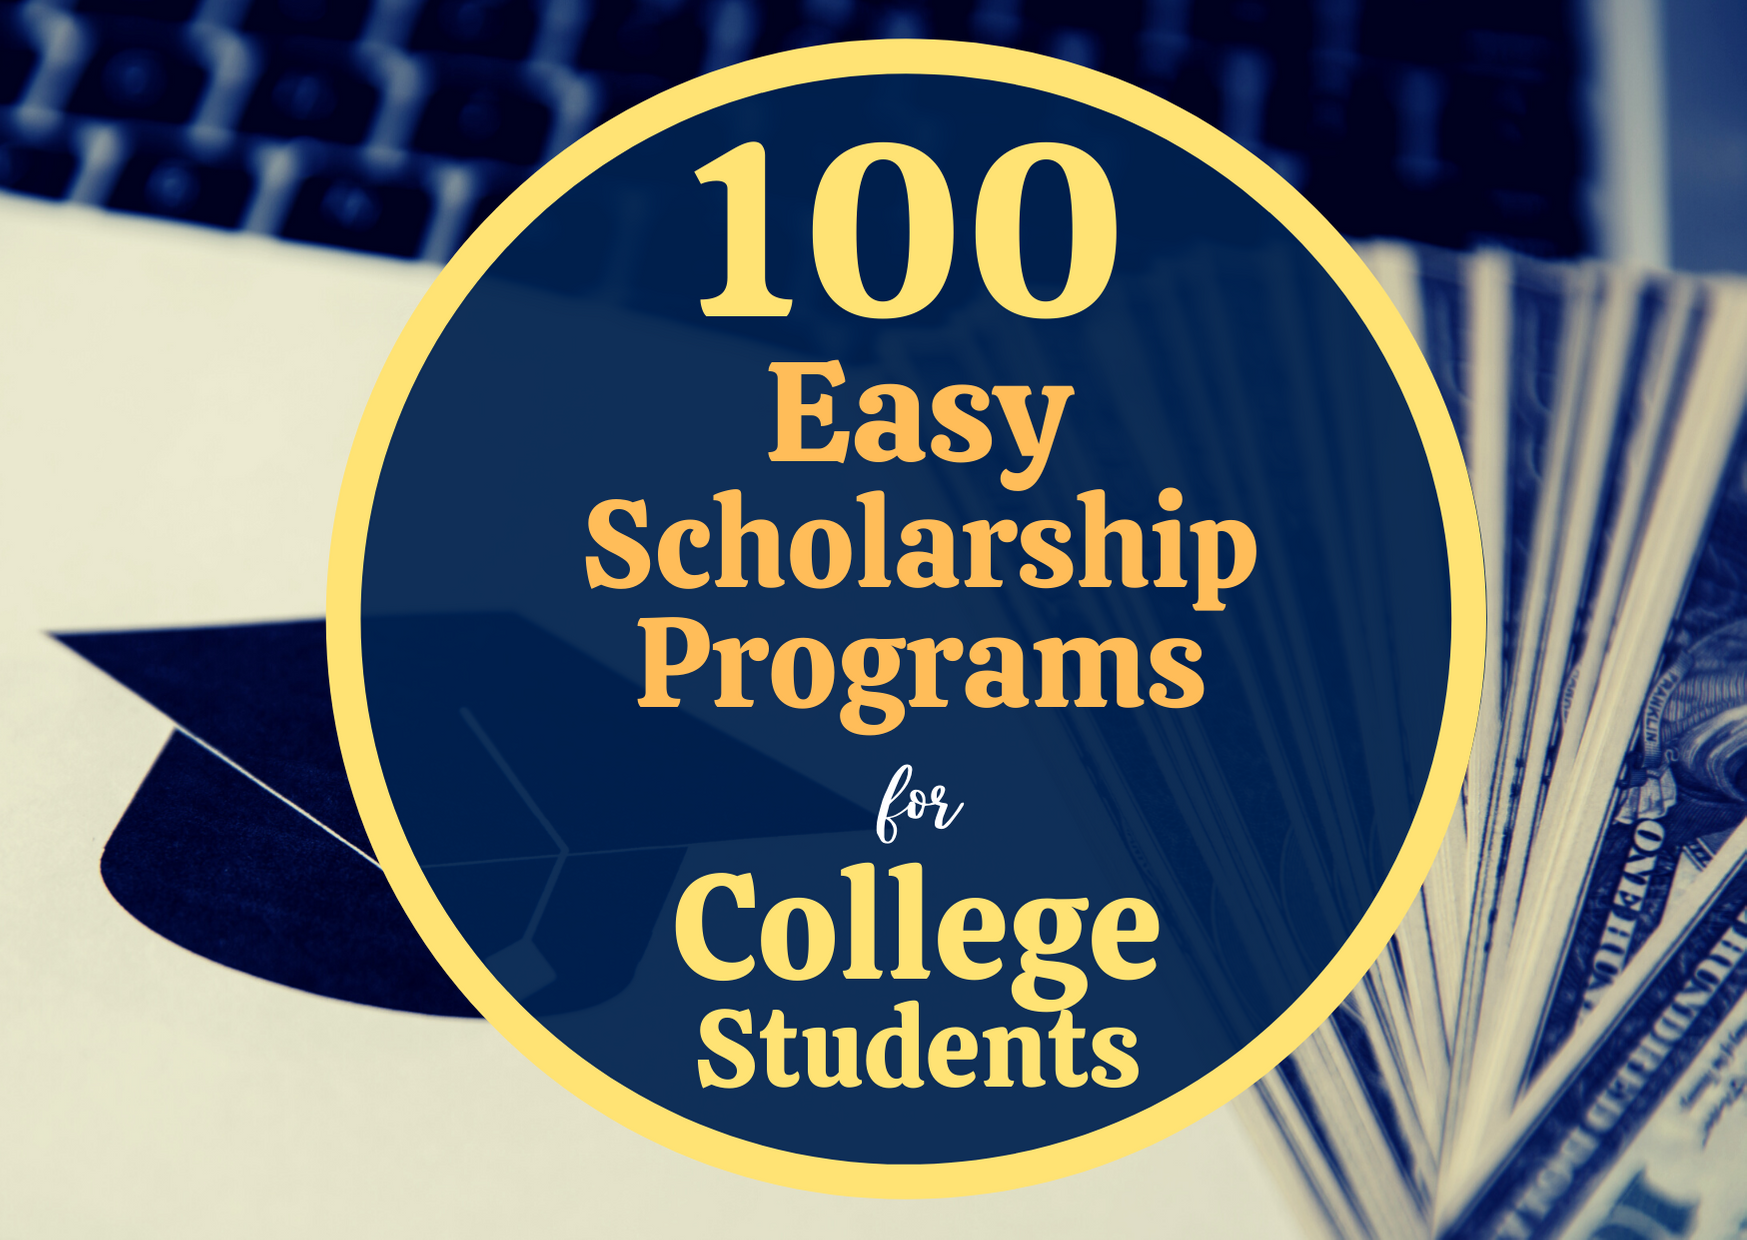 100 Easy Scholarship Programs for College Students College Cliffs